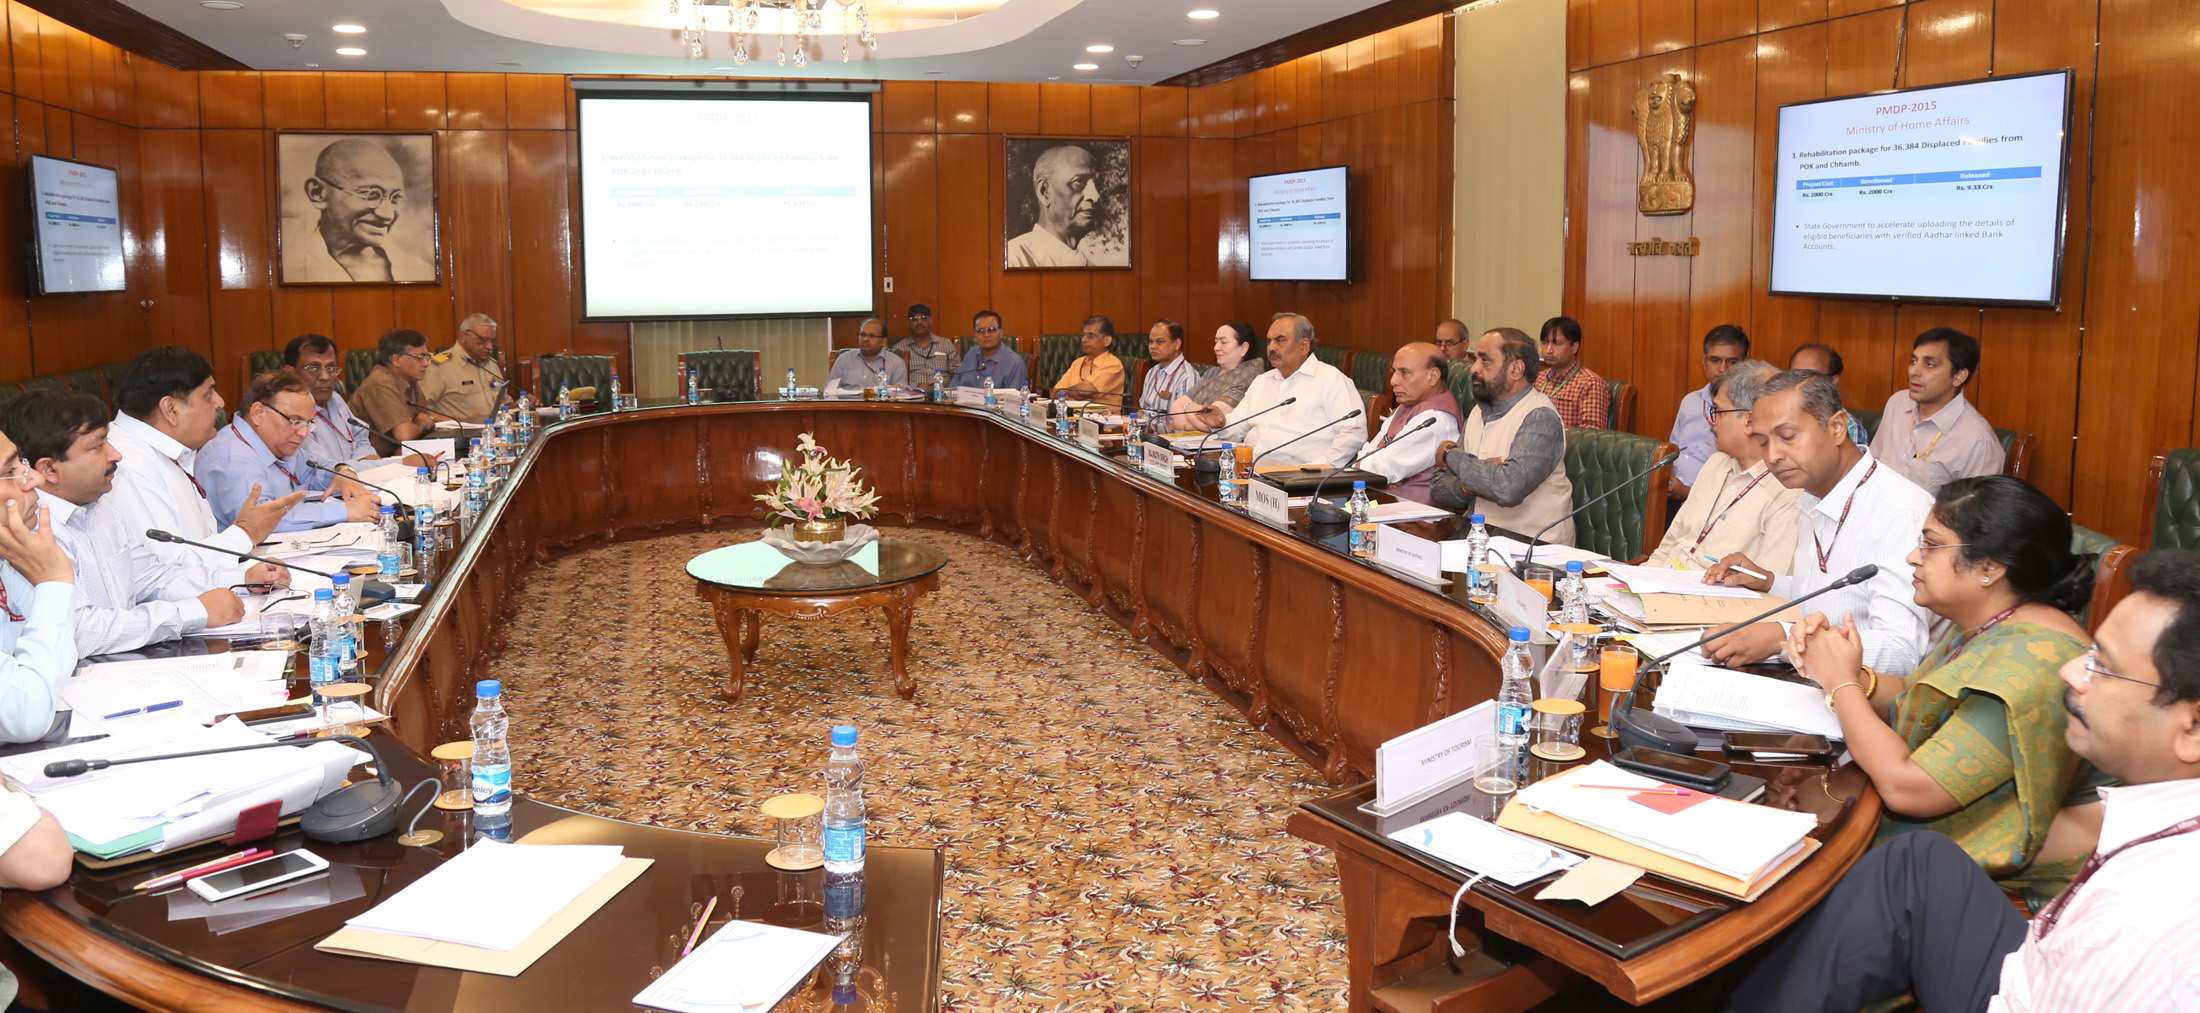 The Union Home Minister, Shri Rajnath Singh chairing a high level meeting to review the progress of Prime Minister's Development Package (PMDP-2015) for Jammu and Kashmir, in New Delhi on April 27, 2017. 	The Minister of State for Home Affairs, Shri Hansraj Gangaram Ahir, the Union Home Secretary, Shri Rajiv Mehrishi and Senior Officers from J&K and other Central Ministries are also seen.